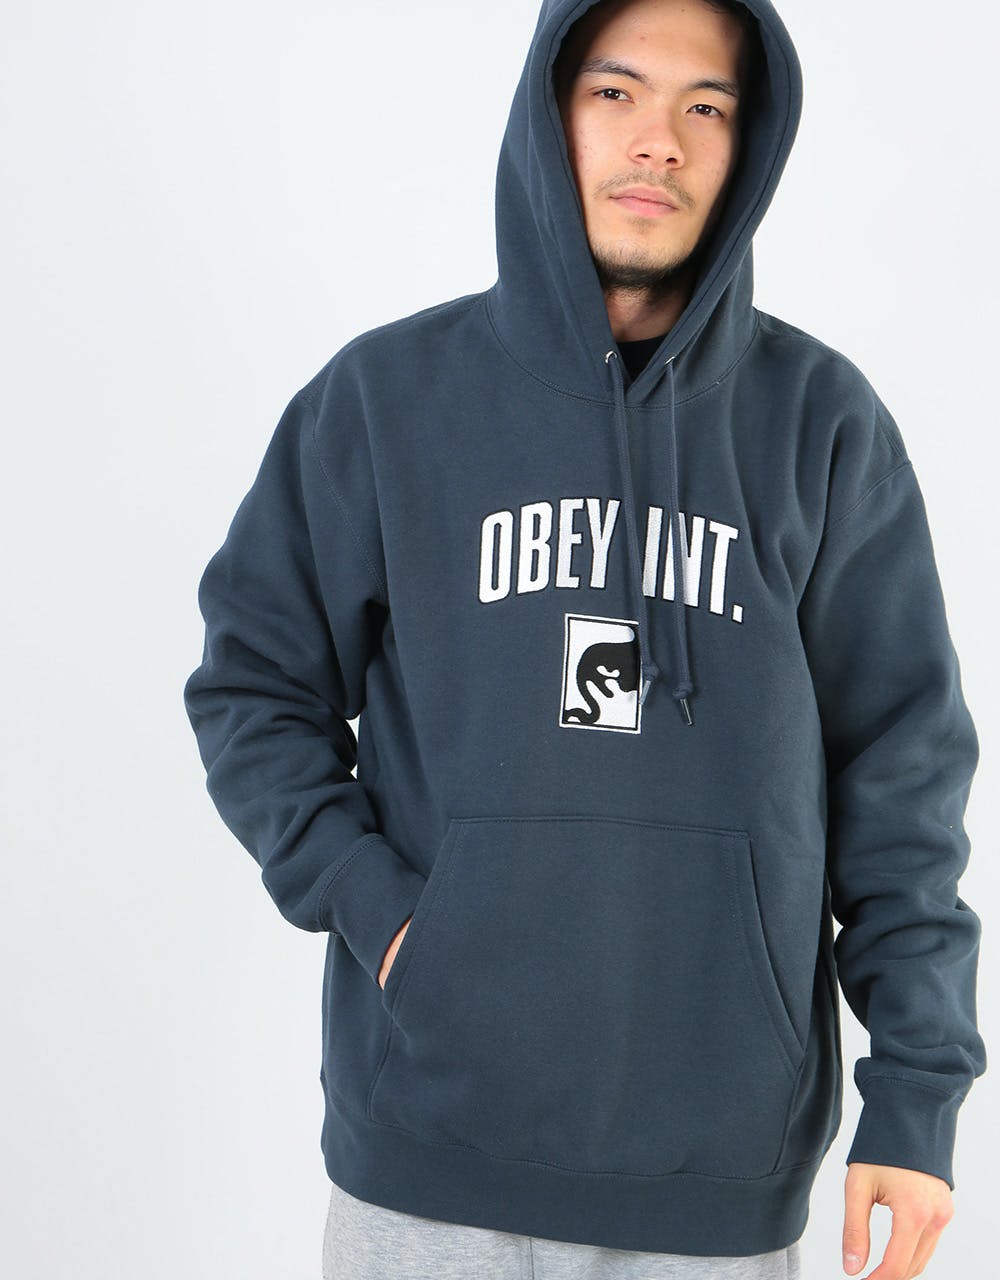 Obey Obey Int. Pullover Hoodie - Slate Blue